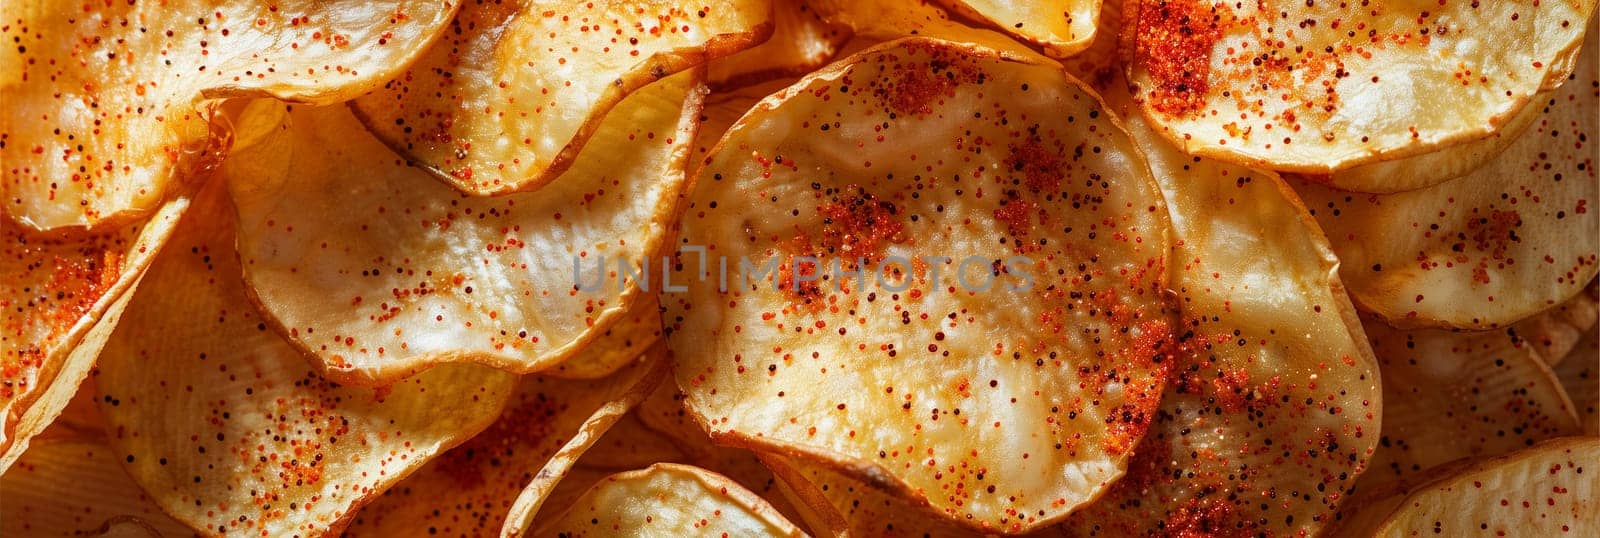 Close Up of a Pile of Potato Chips by Sd28DimoN_1976